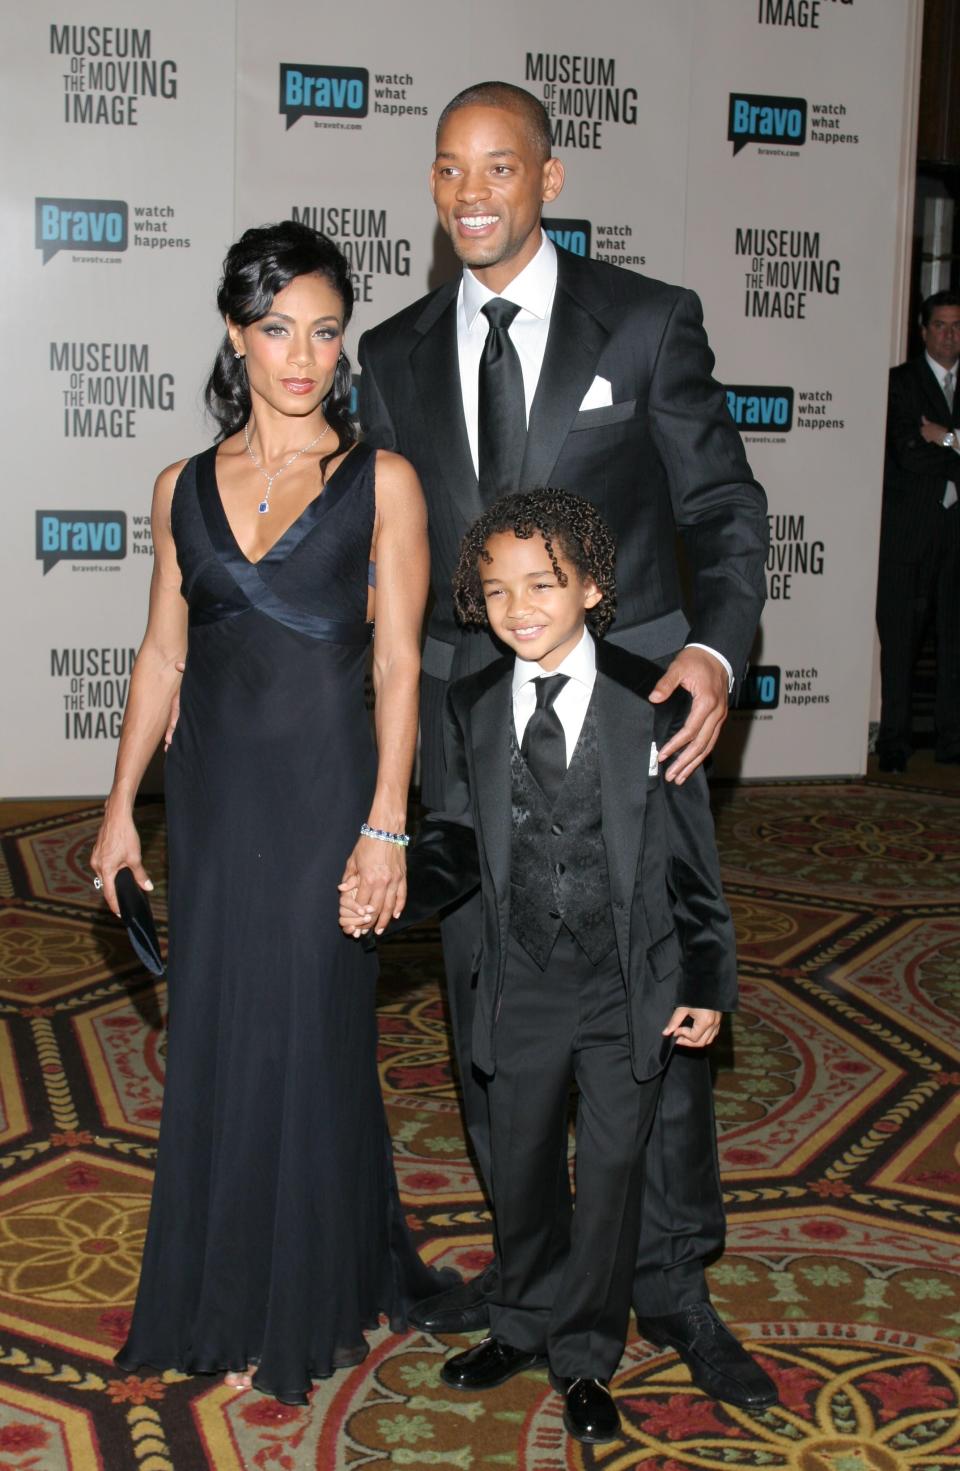 New York, New York Dec. 3, 2006 Will Smith, Jada Pinkett Smith and son Jaden Smith at the Museum Of The Moving Image Salute to Will Smith. full length smile family FRANK ALBERTSON. (Photo by Frank ALBERTSON/Gamma-Rapho via Getty Images)